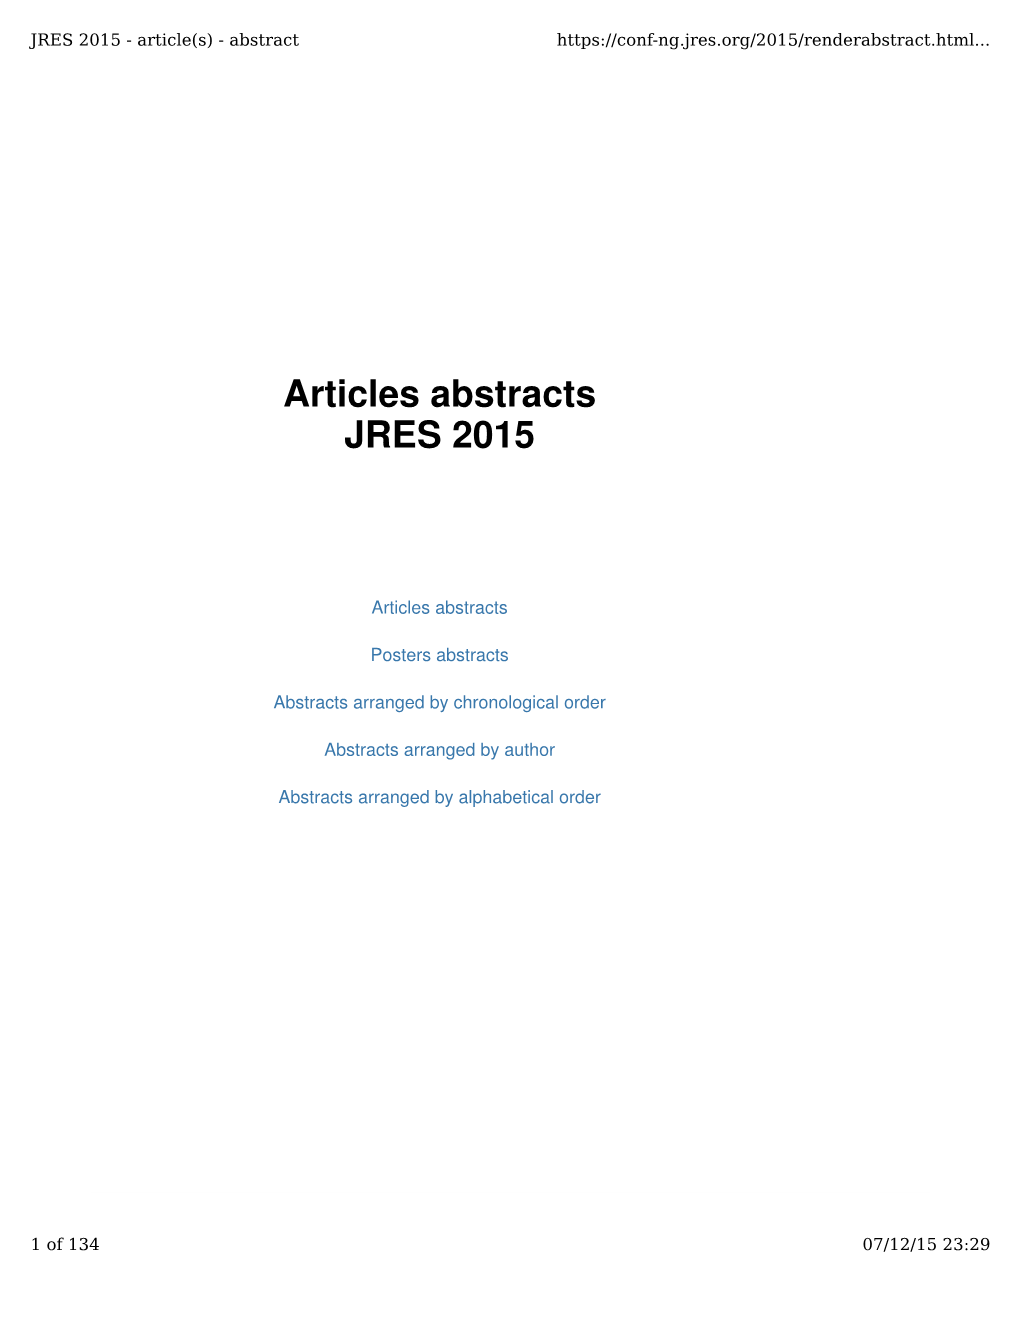 Articles Abstracts JRES 2015